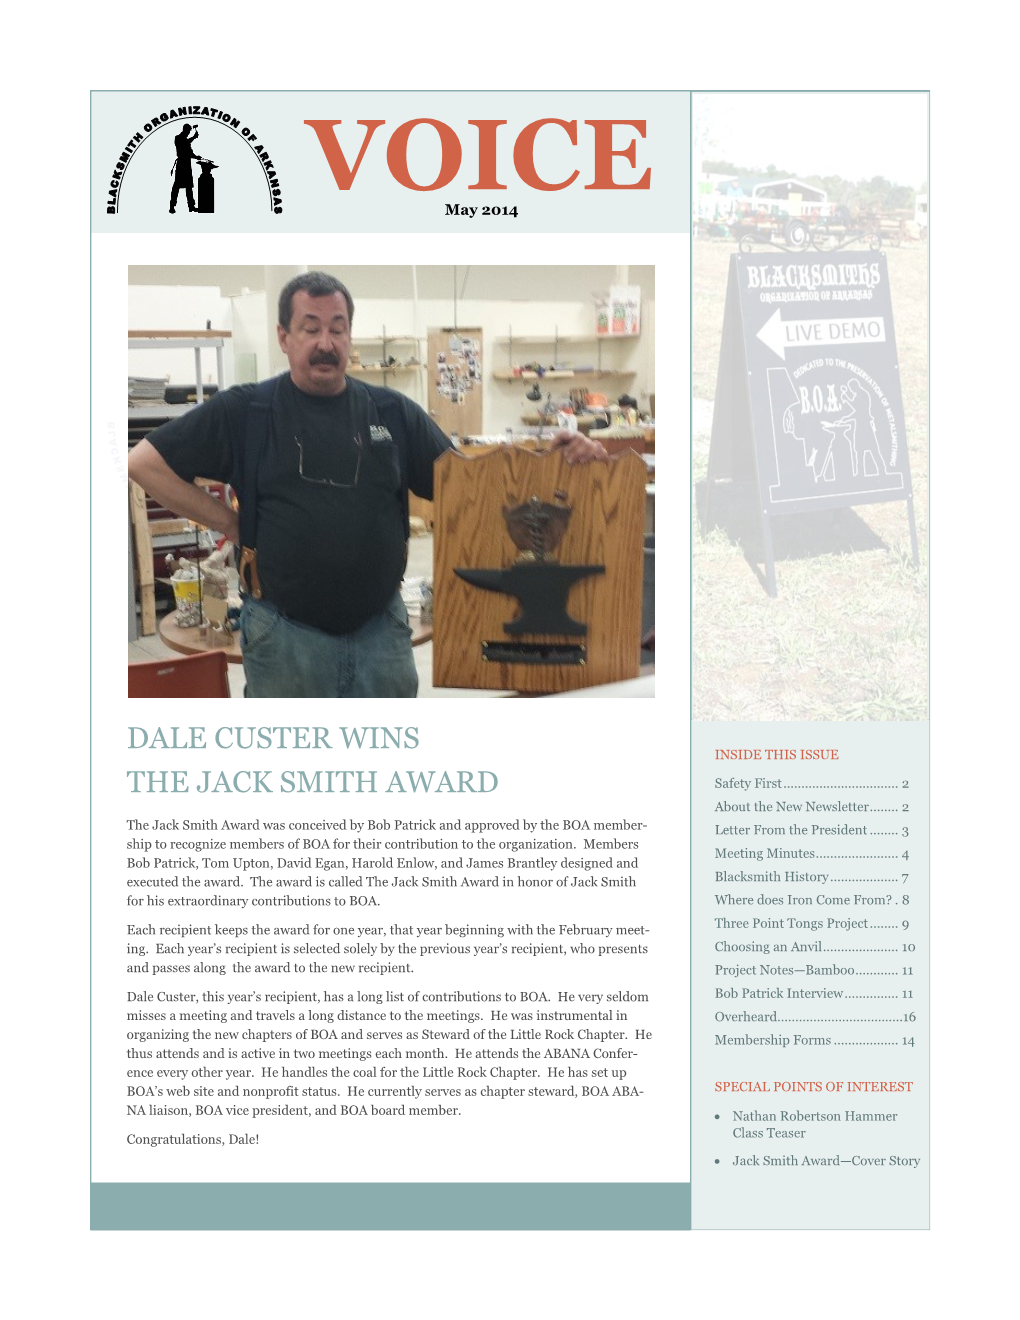 Dale Custer Wins the Jack Smith Award